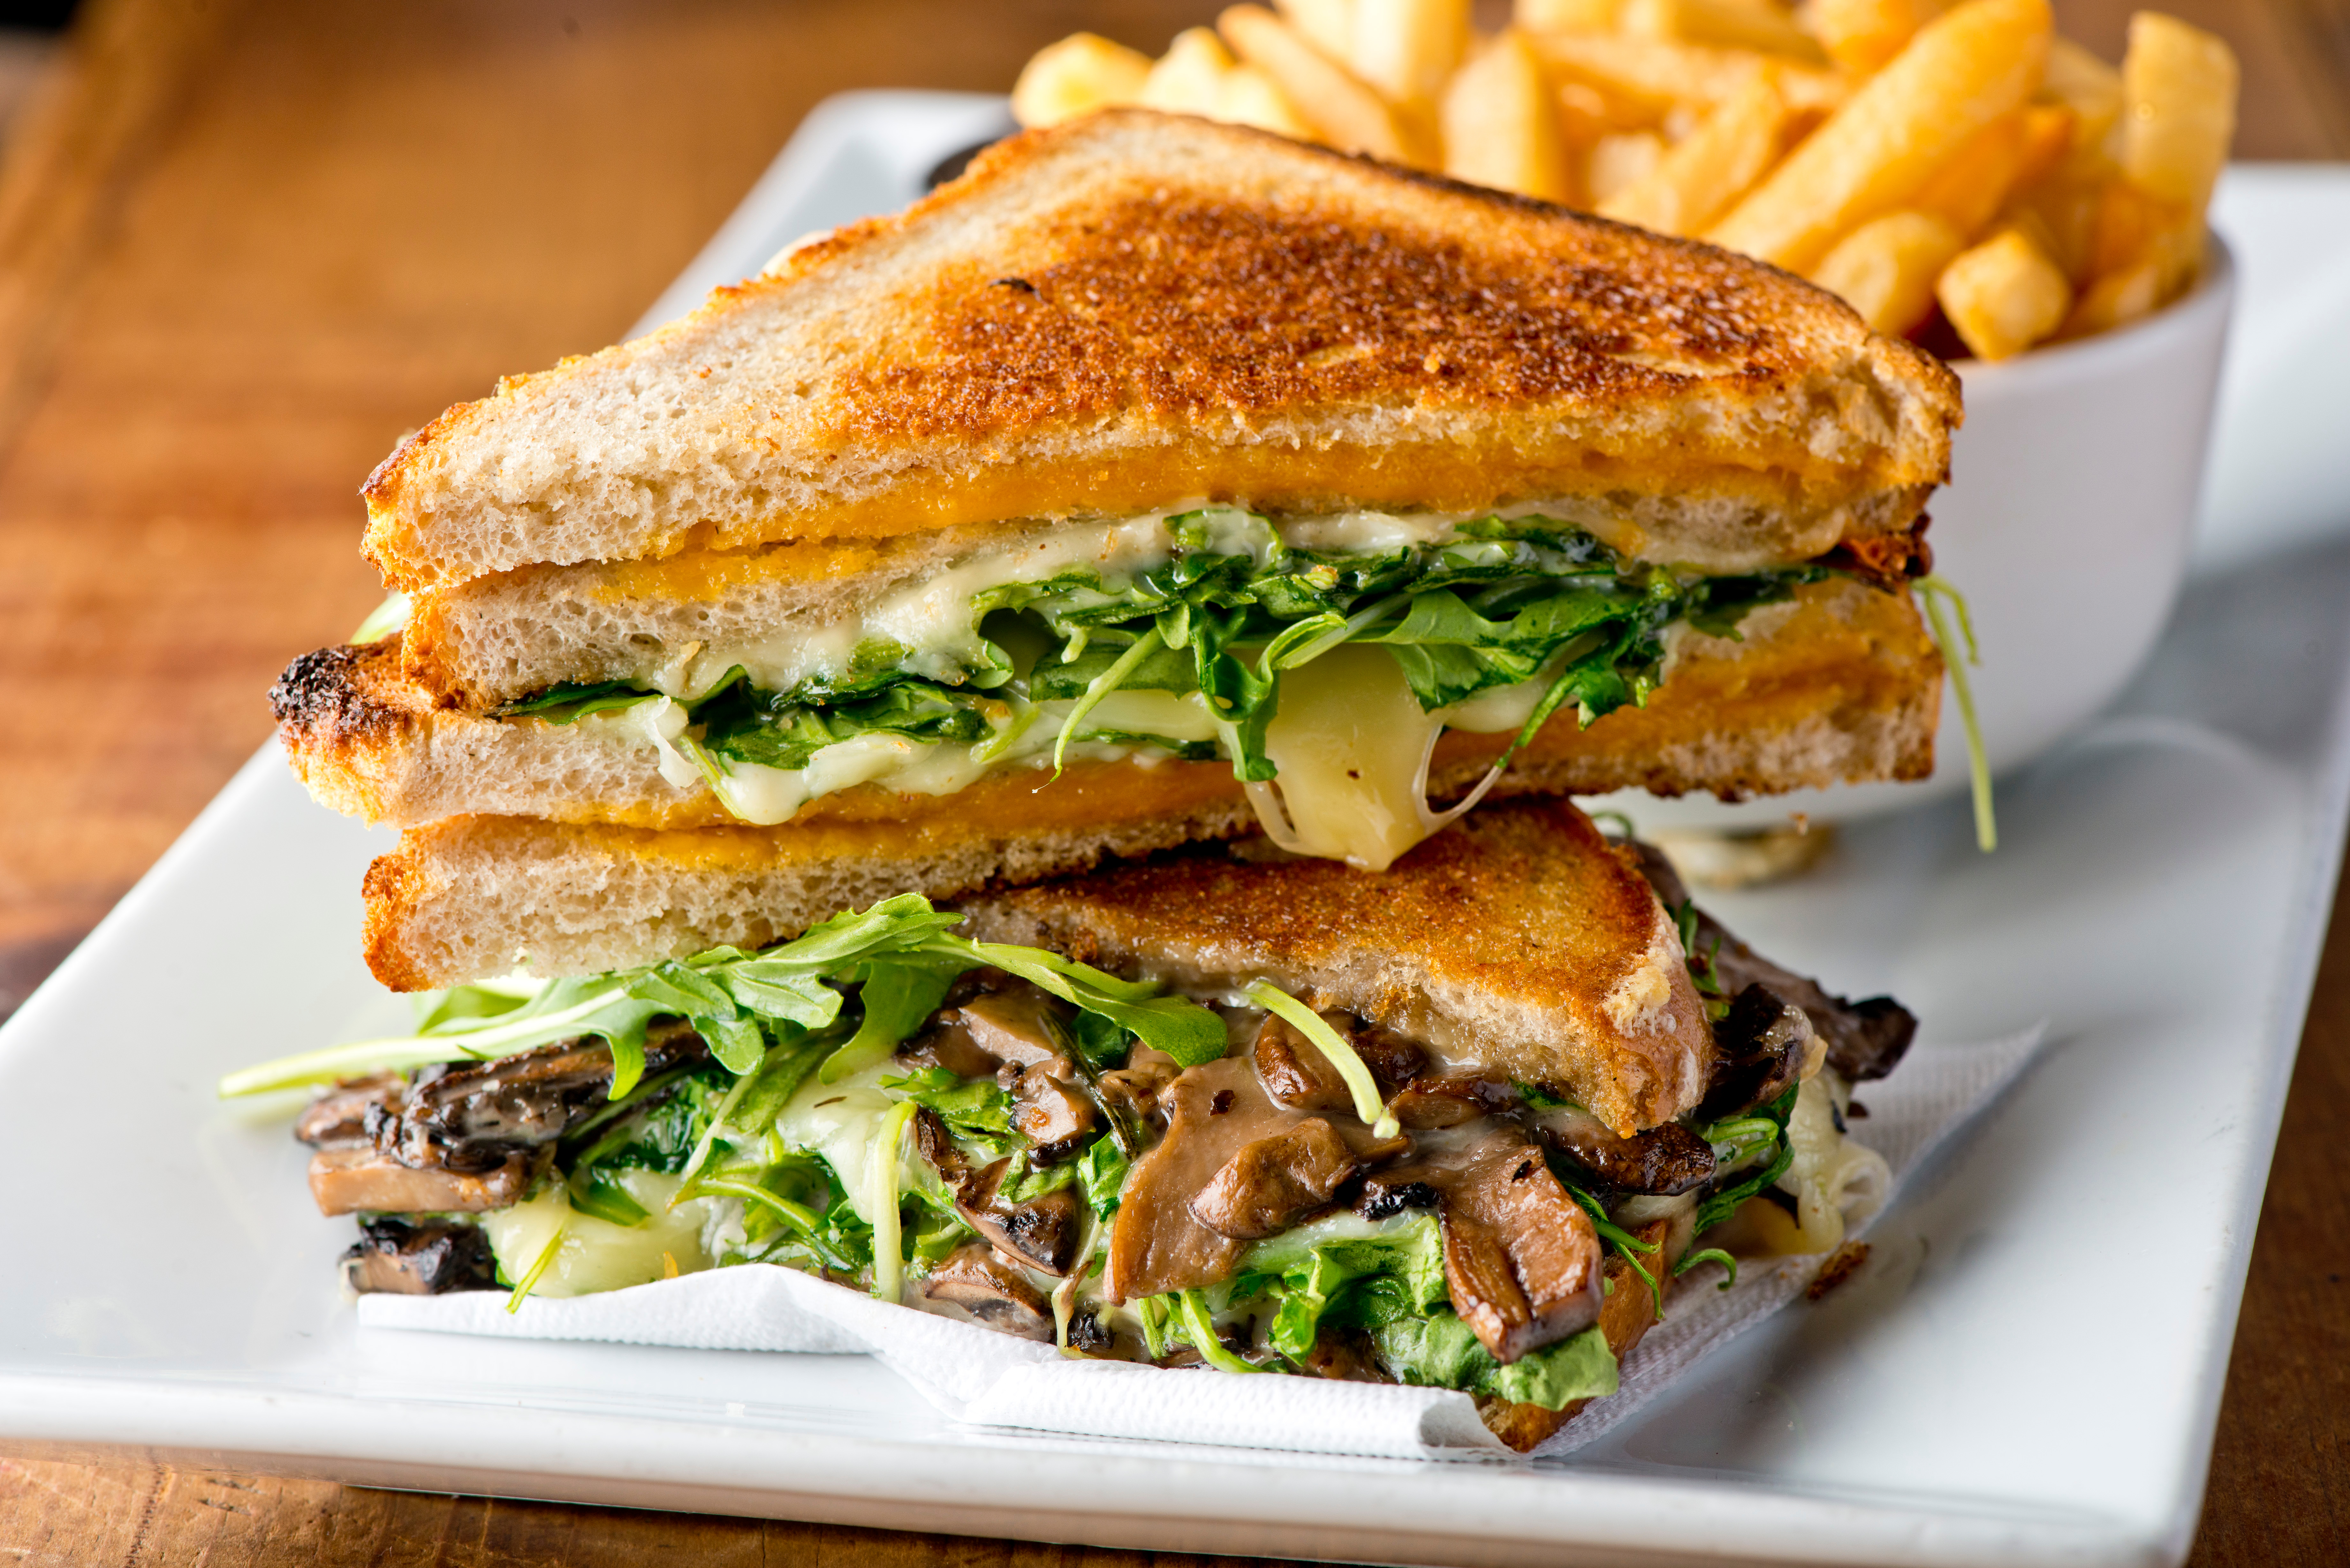 Sandwich with mushrooms, arugula, and melted cheese cut in half and displayed on a plate.